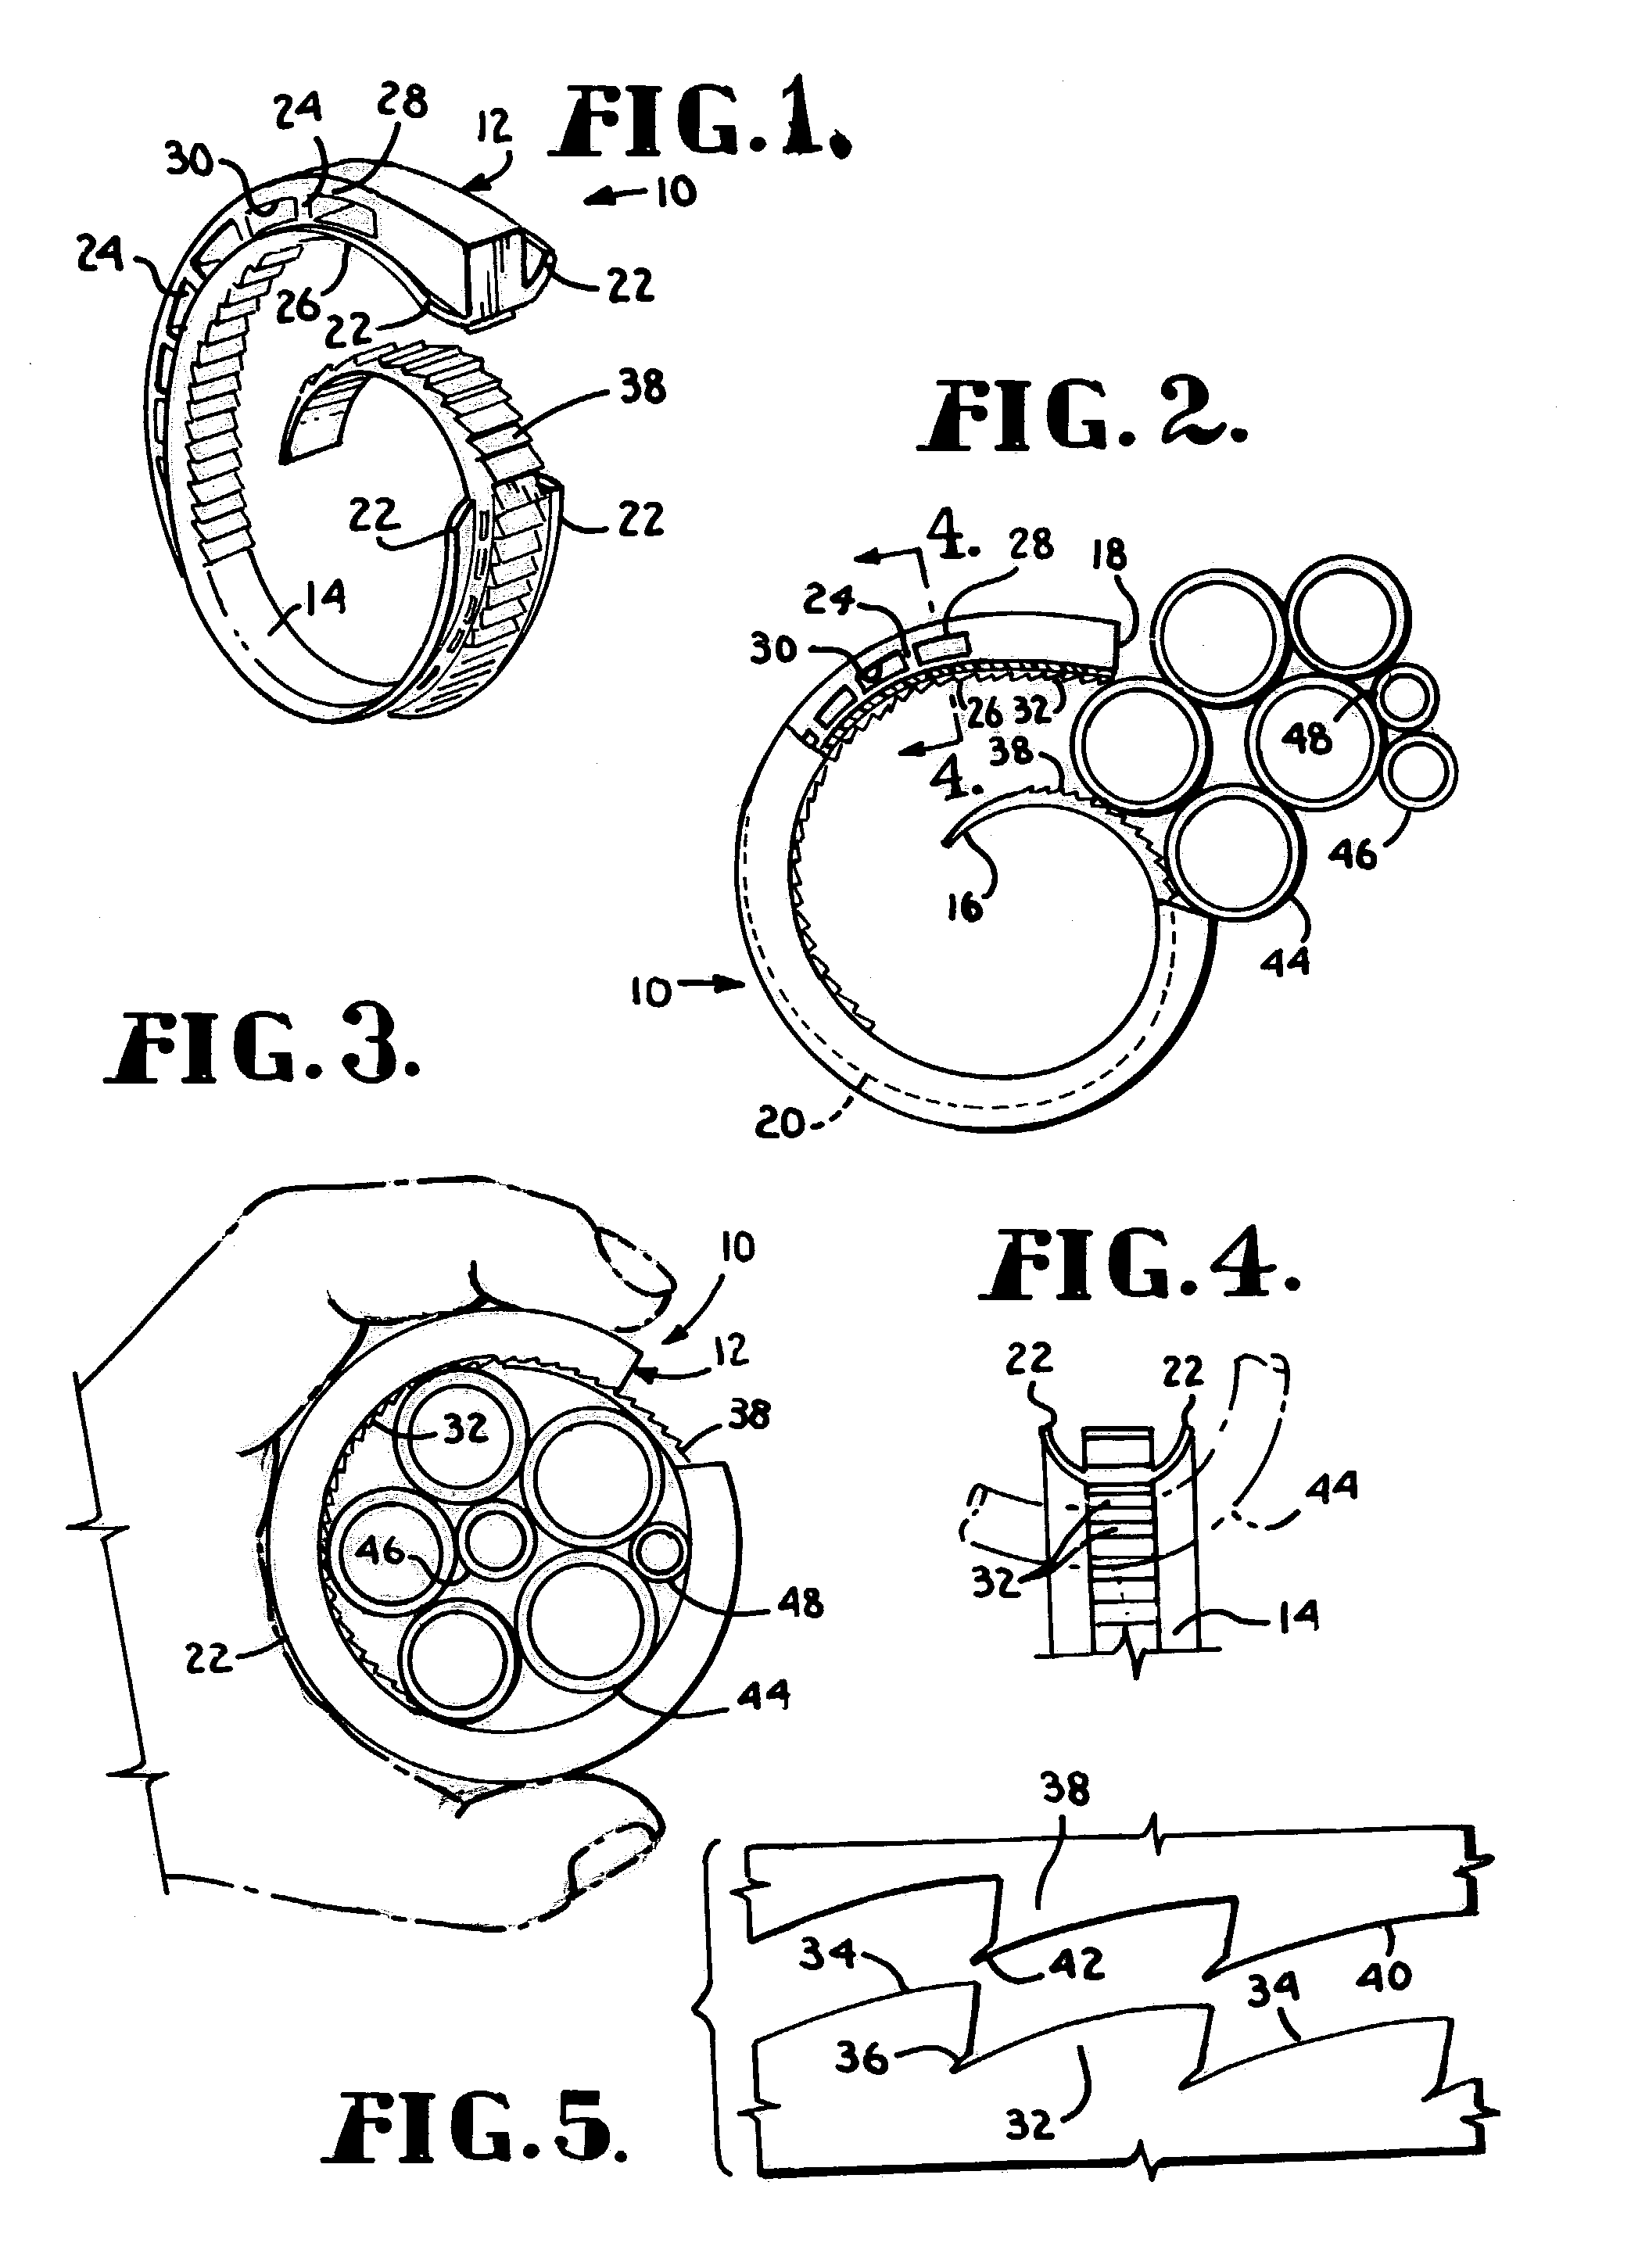 Cable retention device